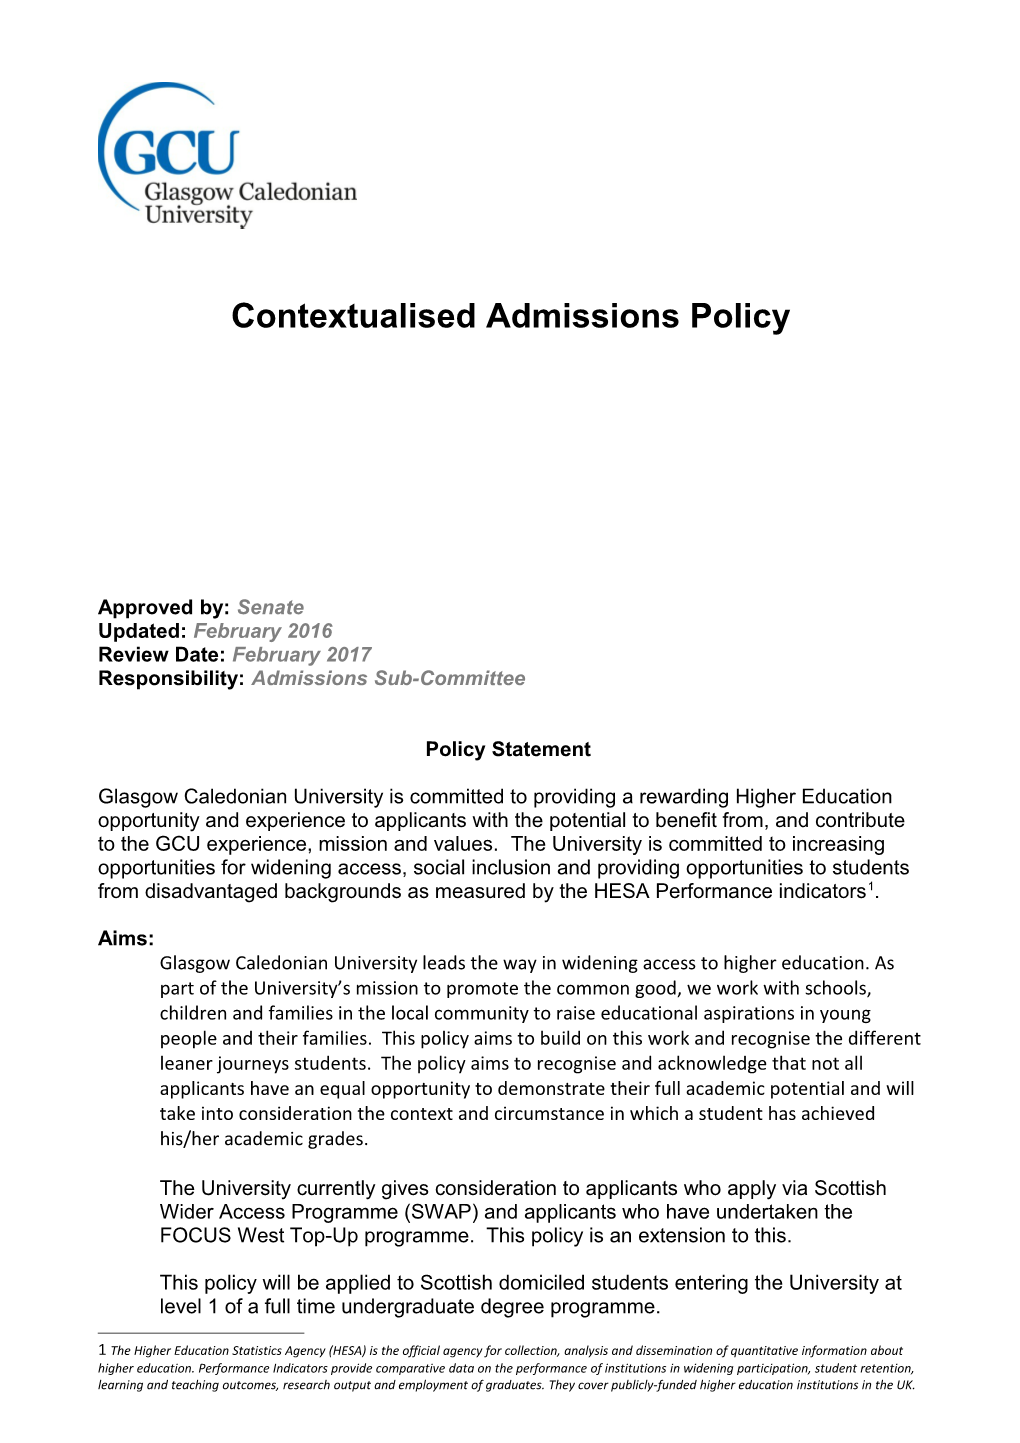 Responsibility: Admissions Sub-Committee